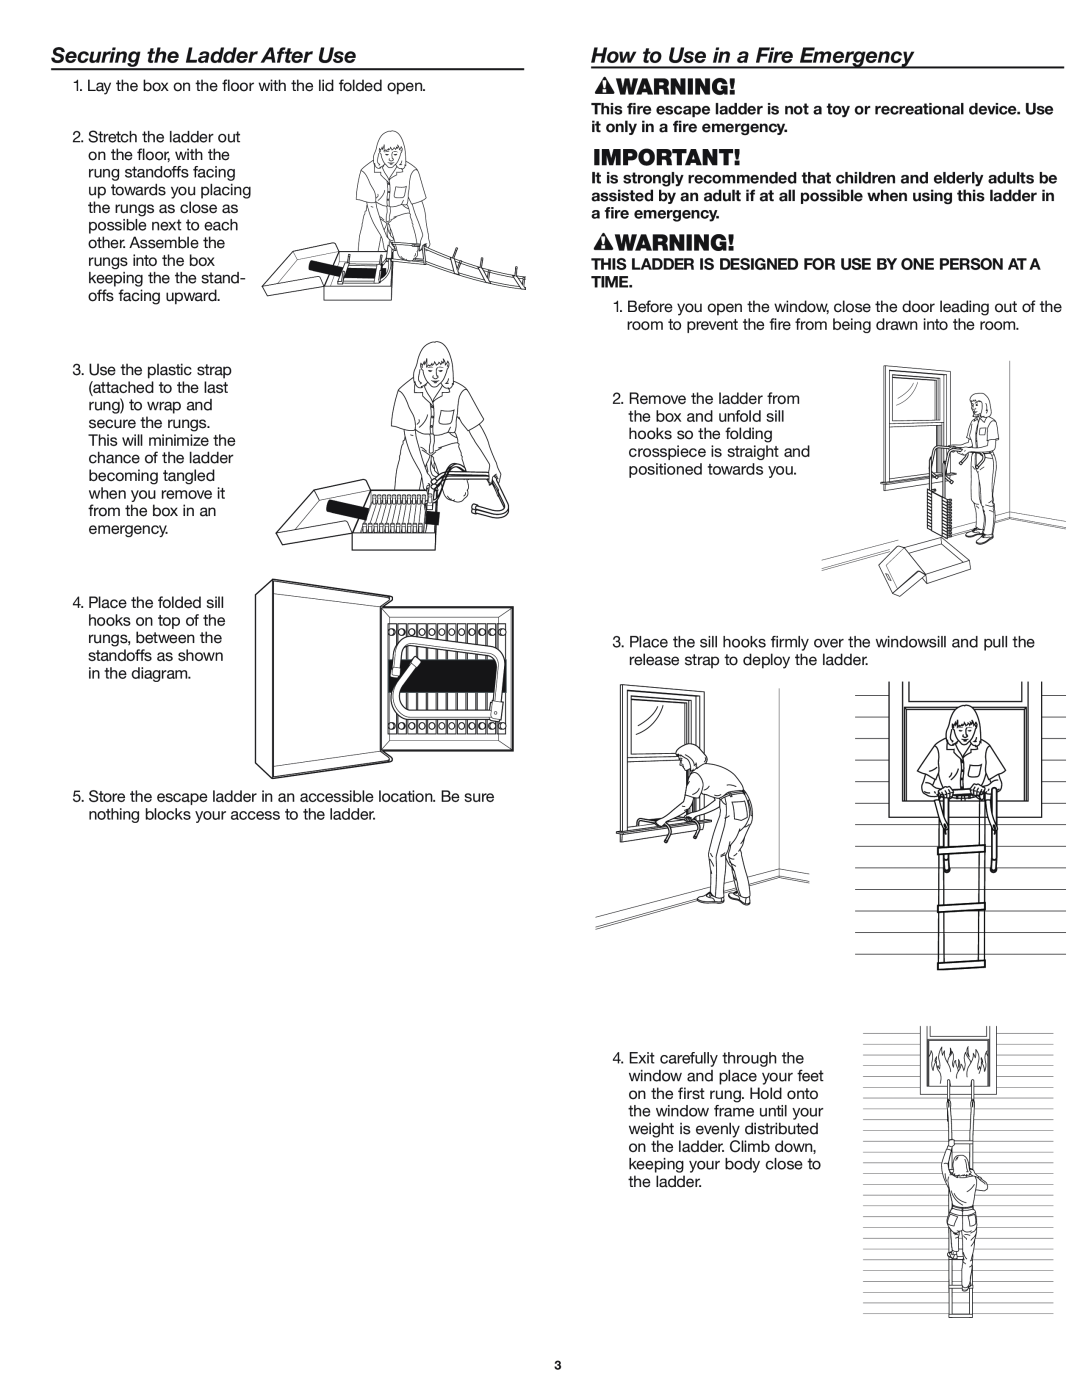 First Alert EL52 user manual Securing the Ladder After Use, How to Use in a Fire Emergency 